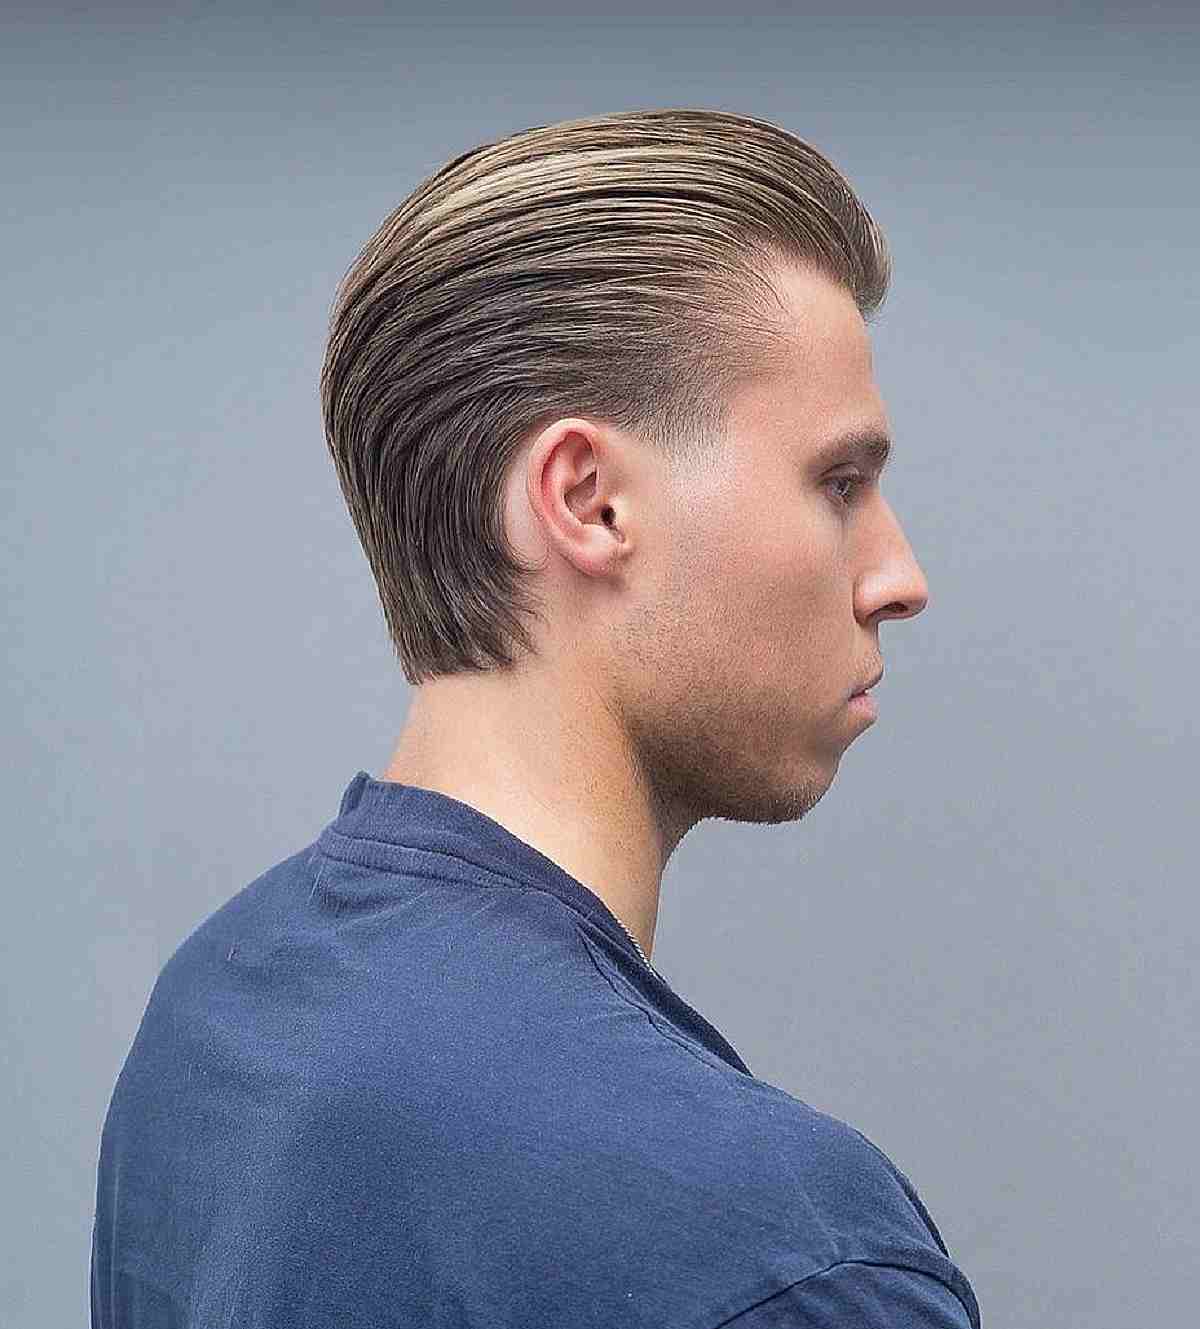 Slicked Back Hair for Men - How to Achieve this Style